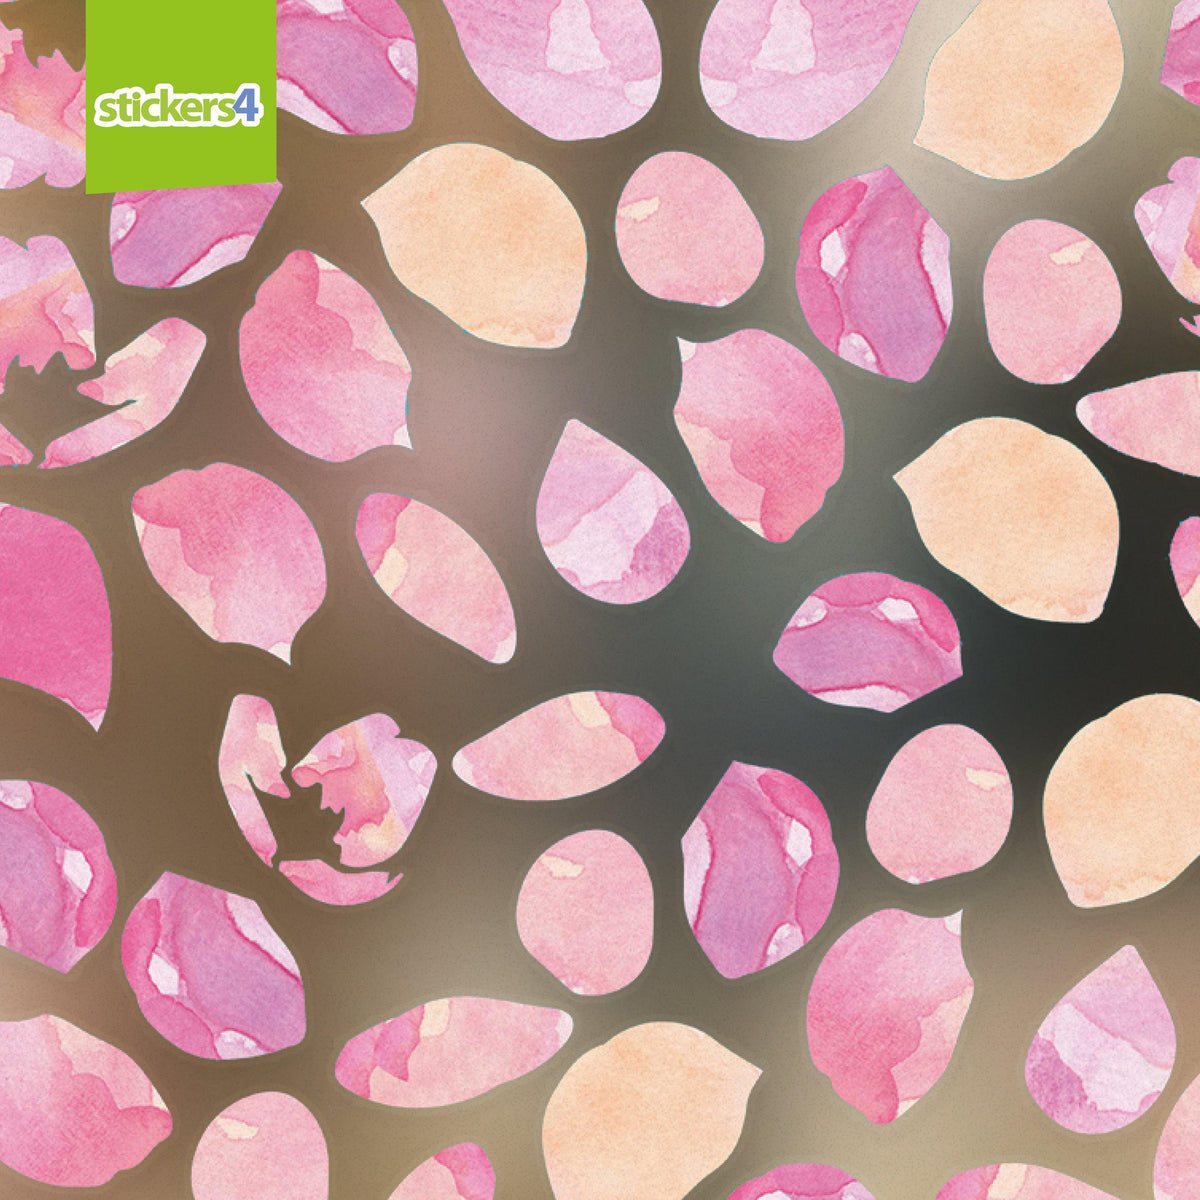 Cherry Blossom Petals - Large pack Spring Window Display